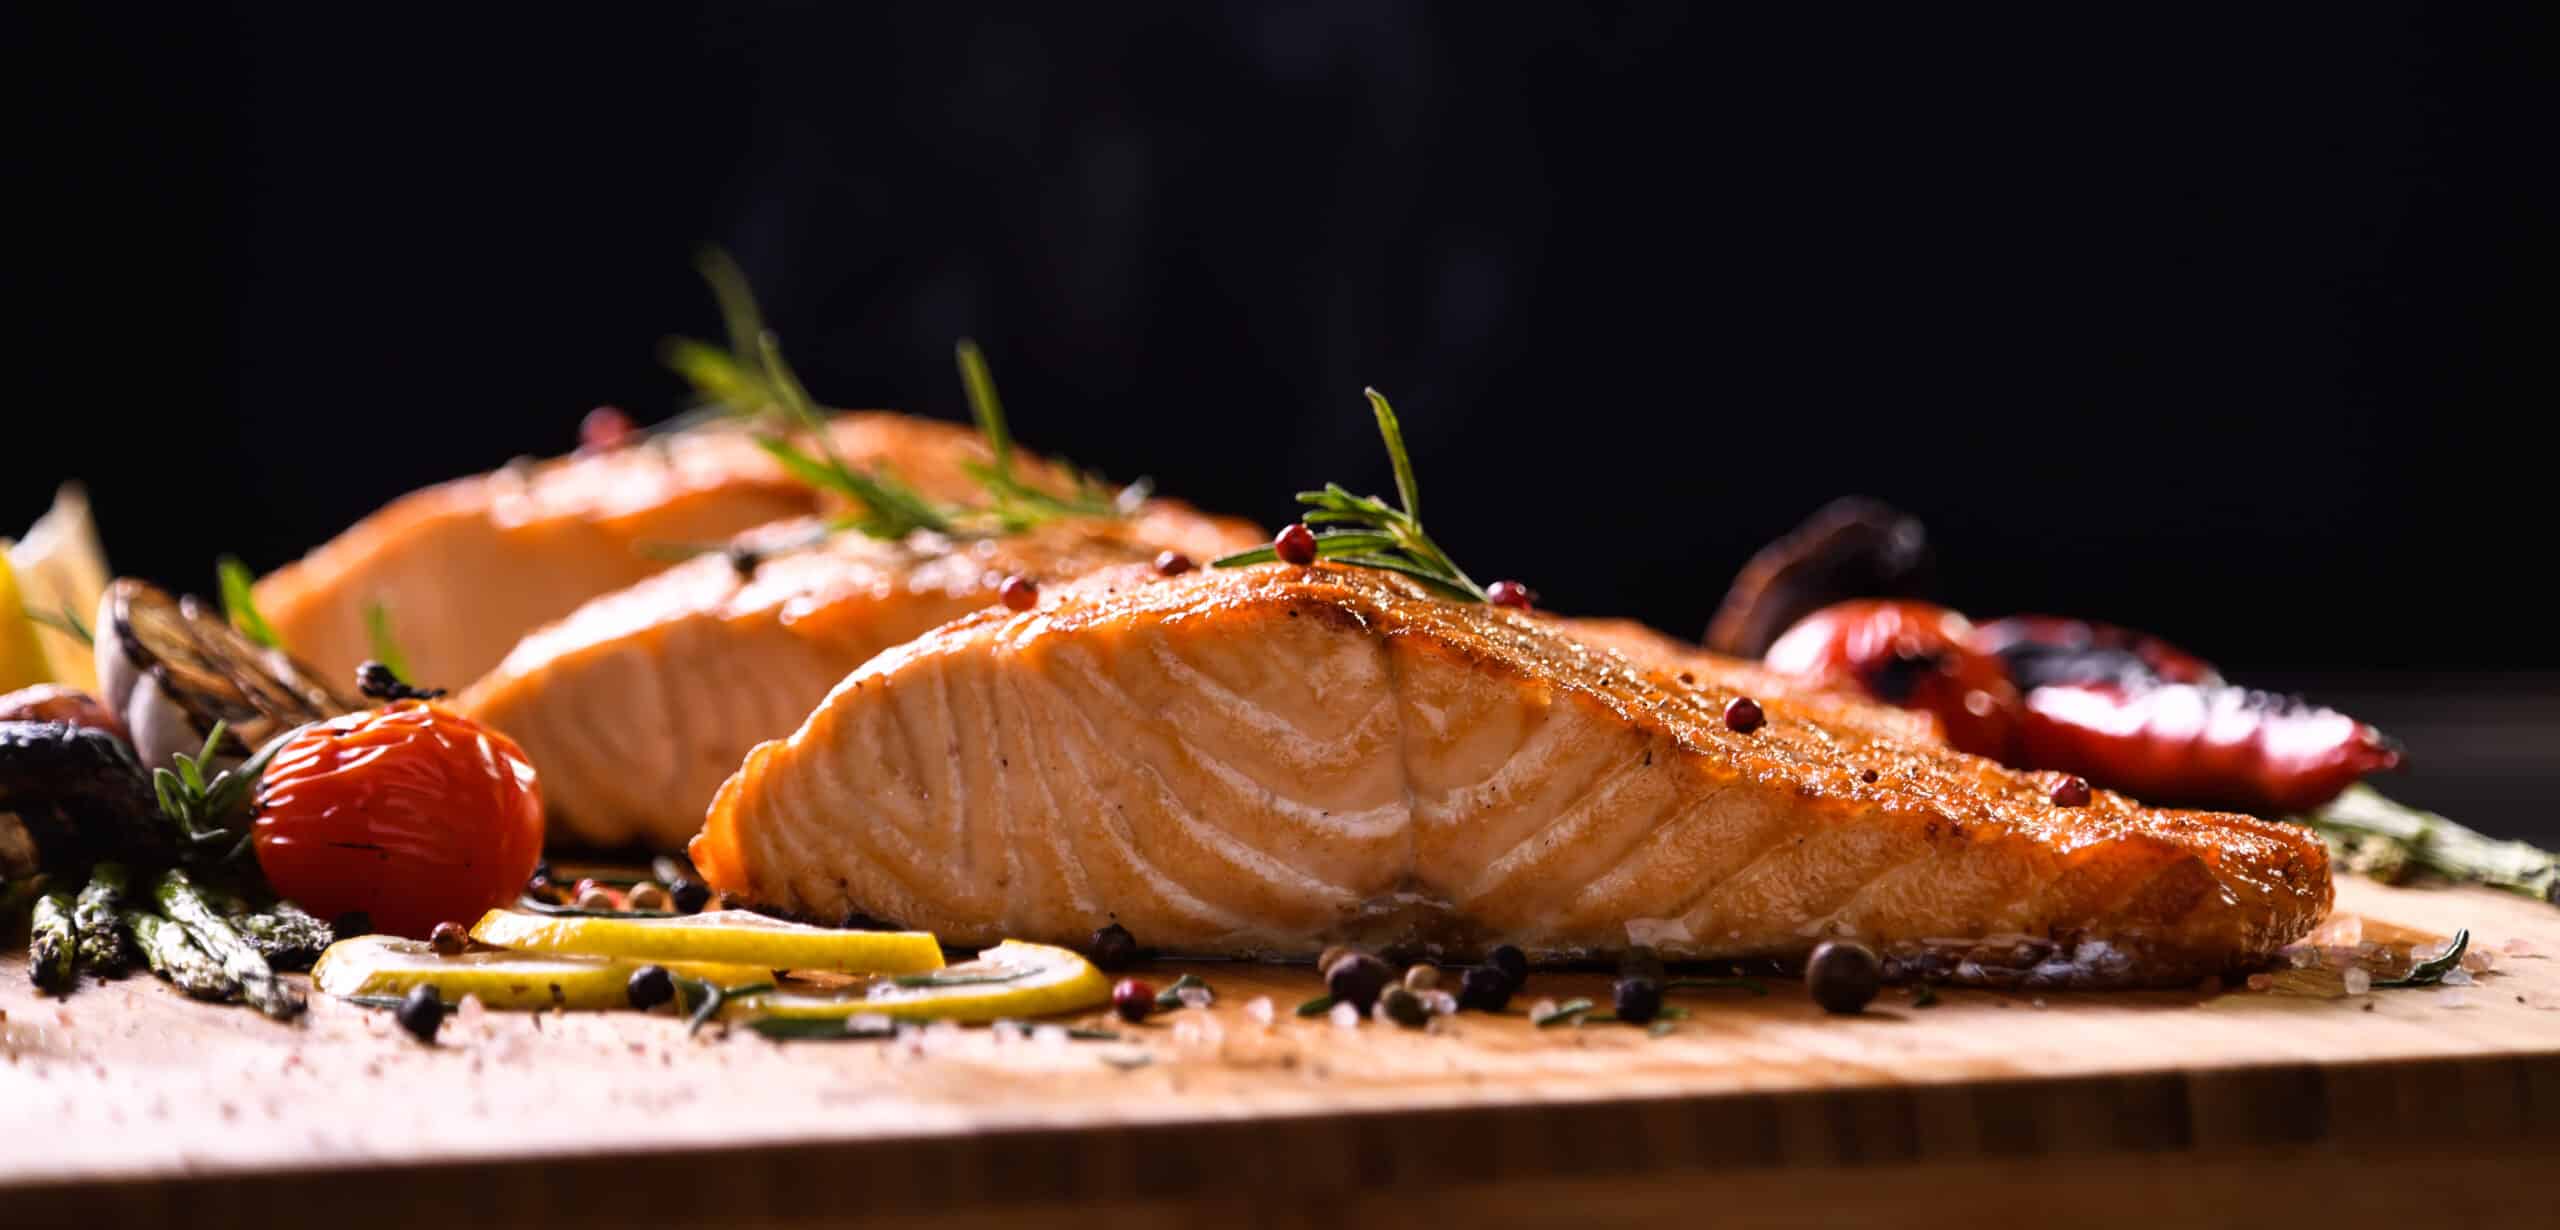 Grilled salmon fish and various vegetables on wooden table on black background